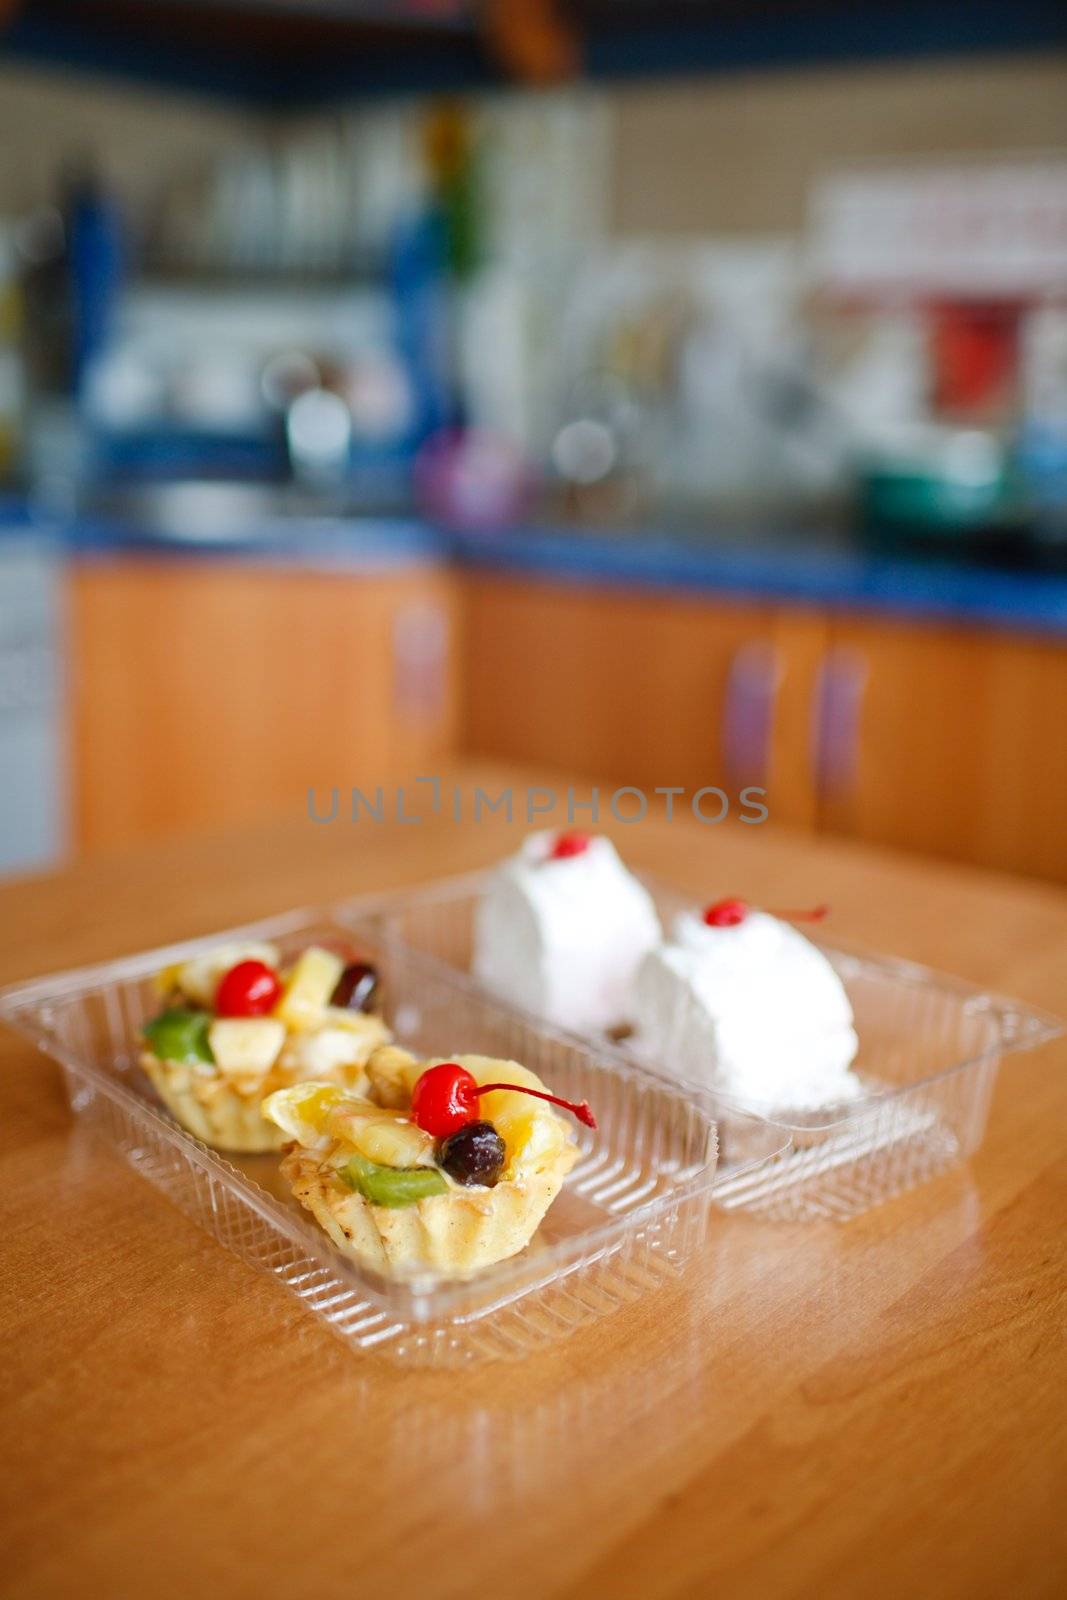 Cupcakes with cherry on top on wooden table. Make with Canon 35 1.4
aperture 1.4 was used for small DOF